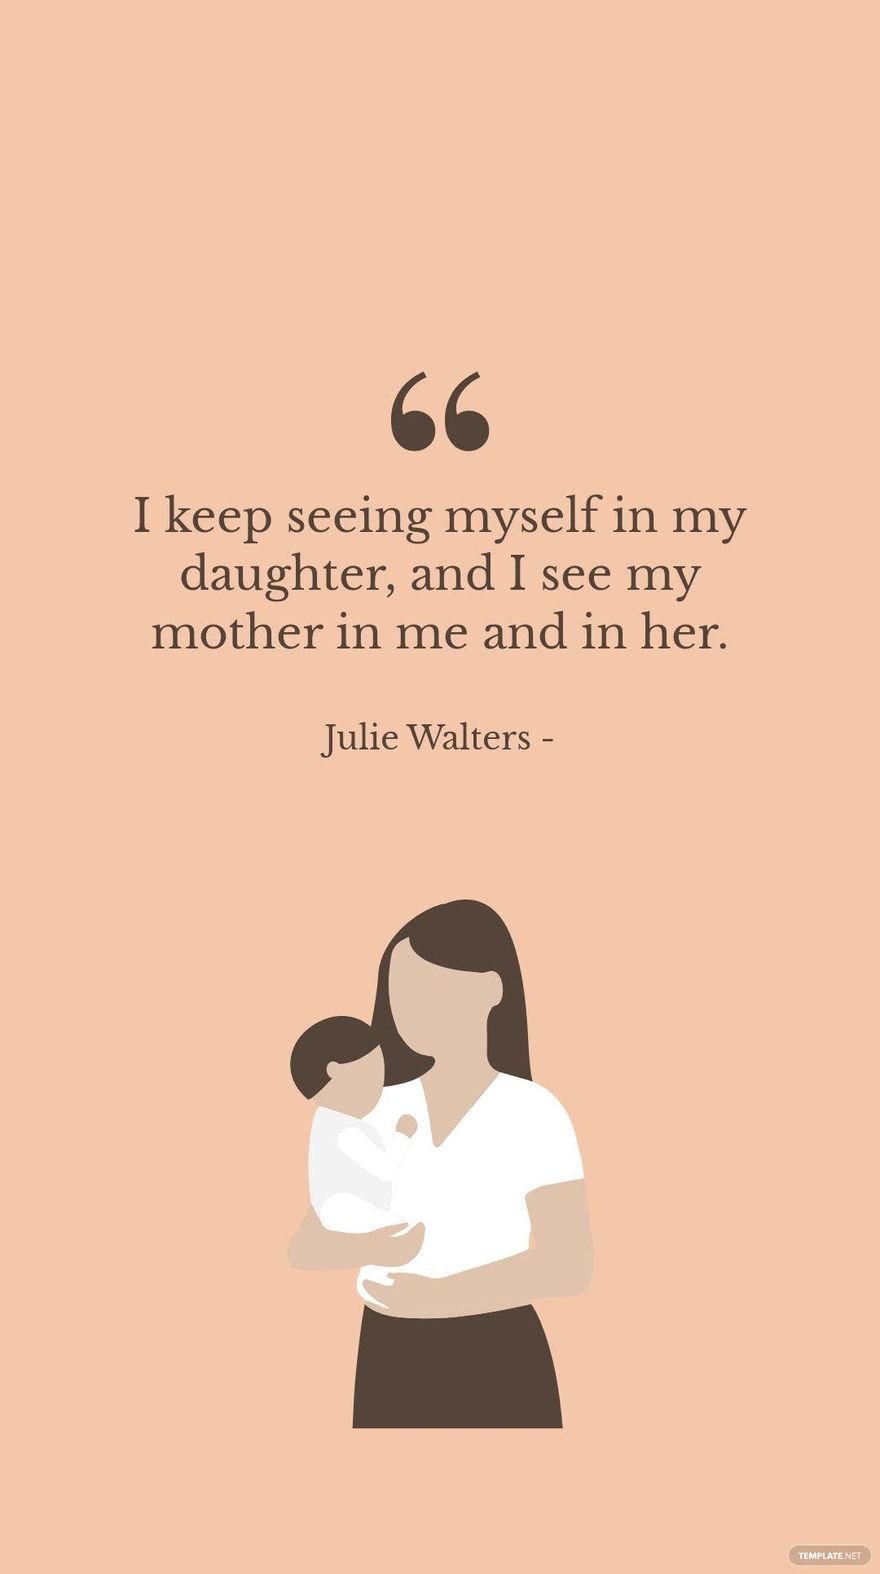 Julie Walters - I keep seeing myself in my daughter, and I see my mother in me and in her. in JPG